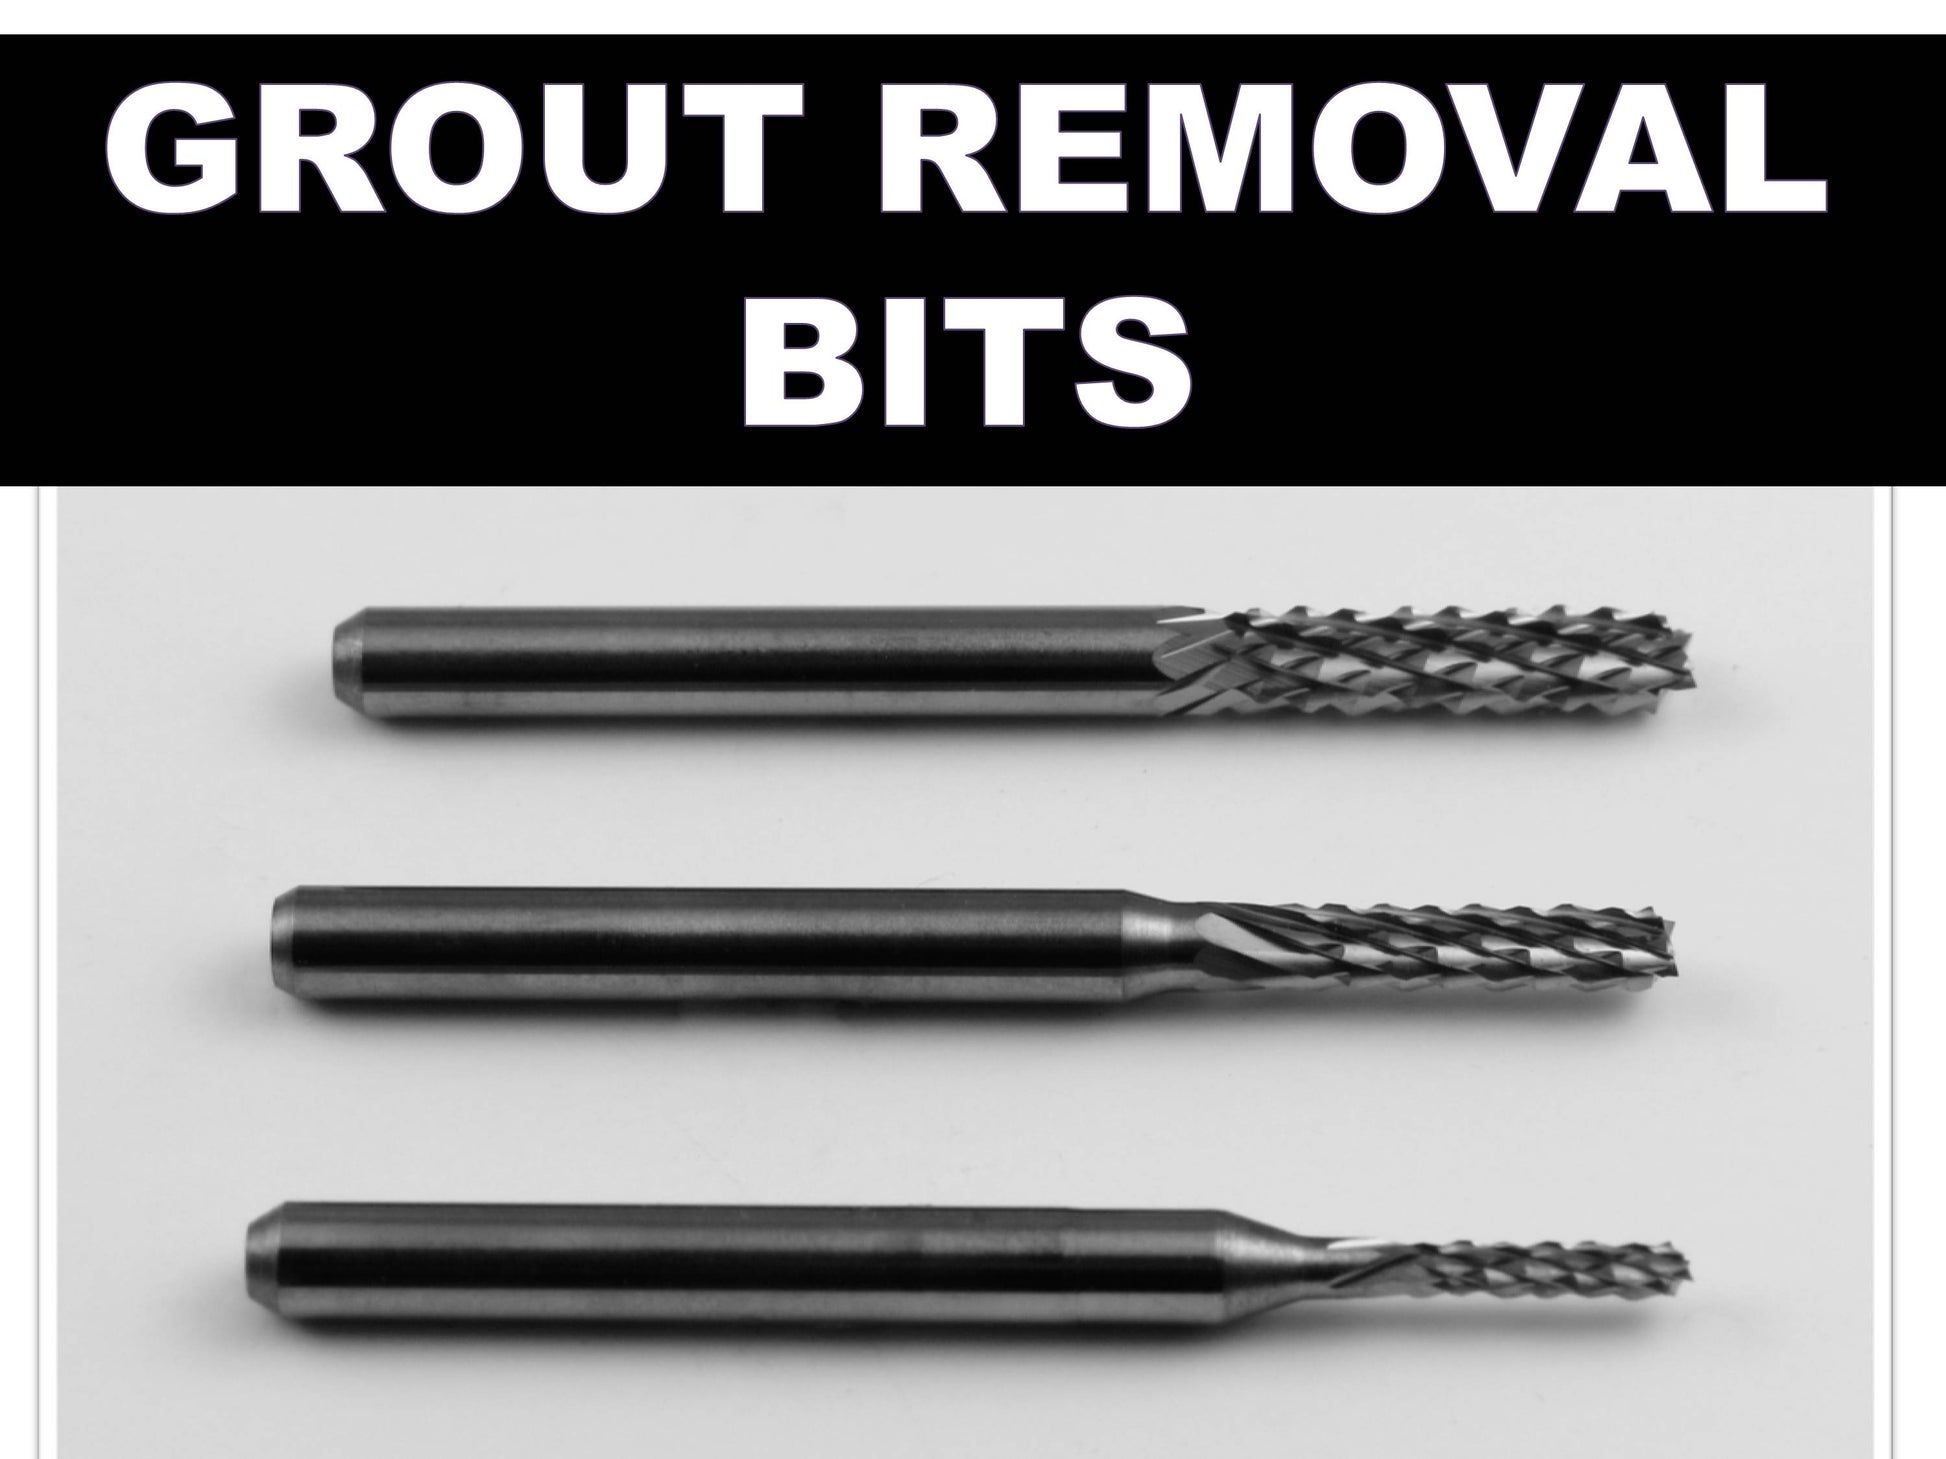 Grout Removal Bits Also Use on Cement Board, Ceramic Wall Tile, Plaster